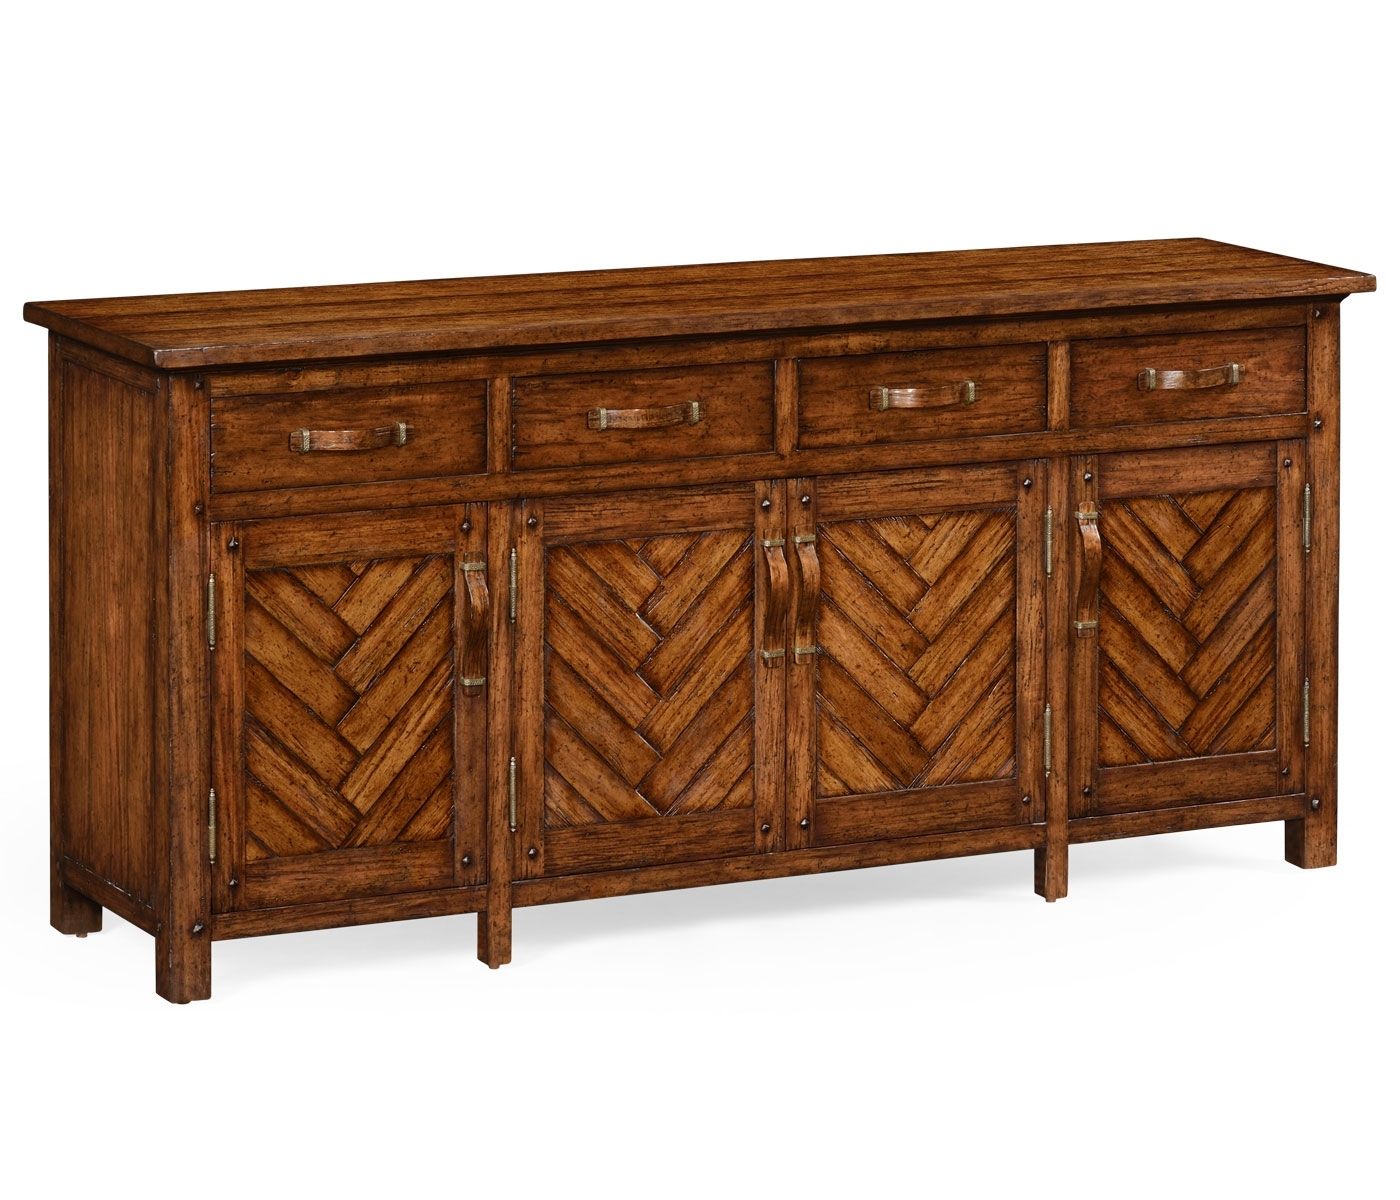 Heavily Distressed Parquet Sideboard With Strap Handles Within Parquet Sideboards (View 6 of 30)